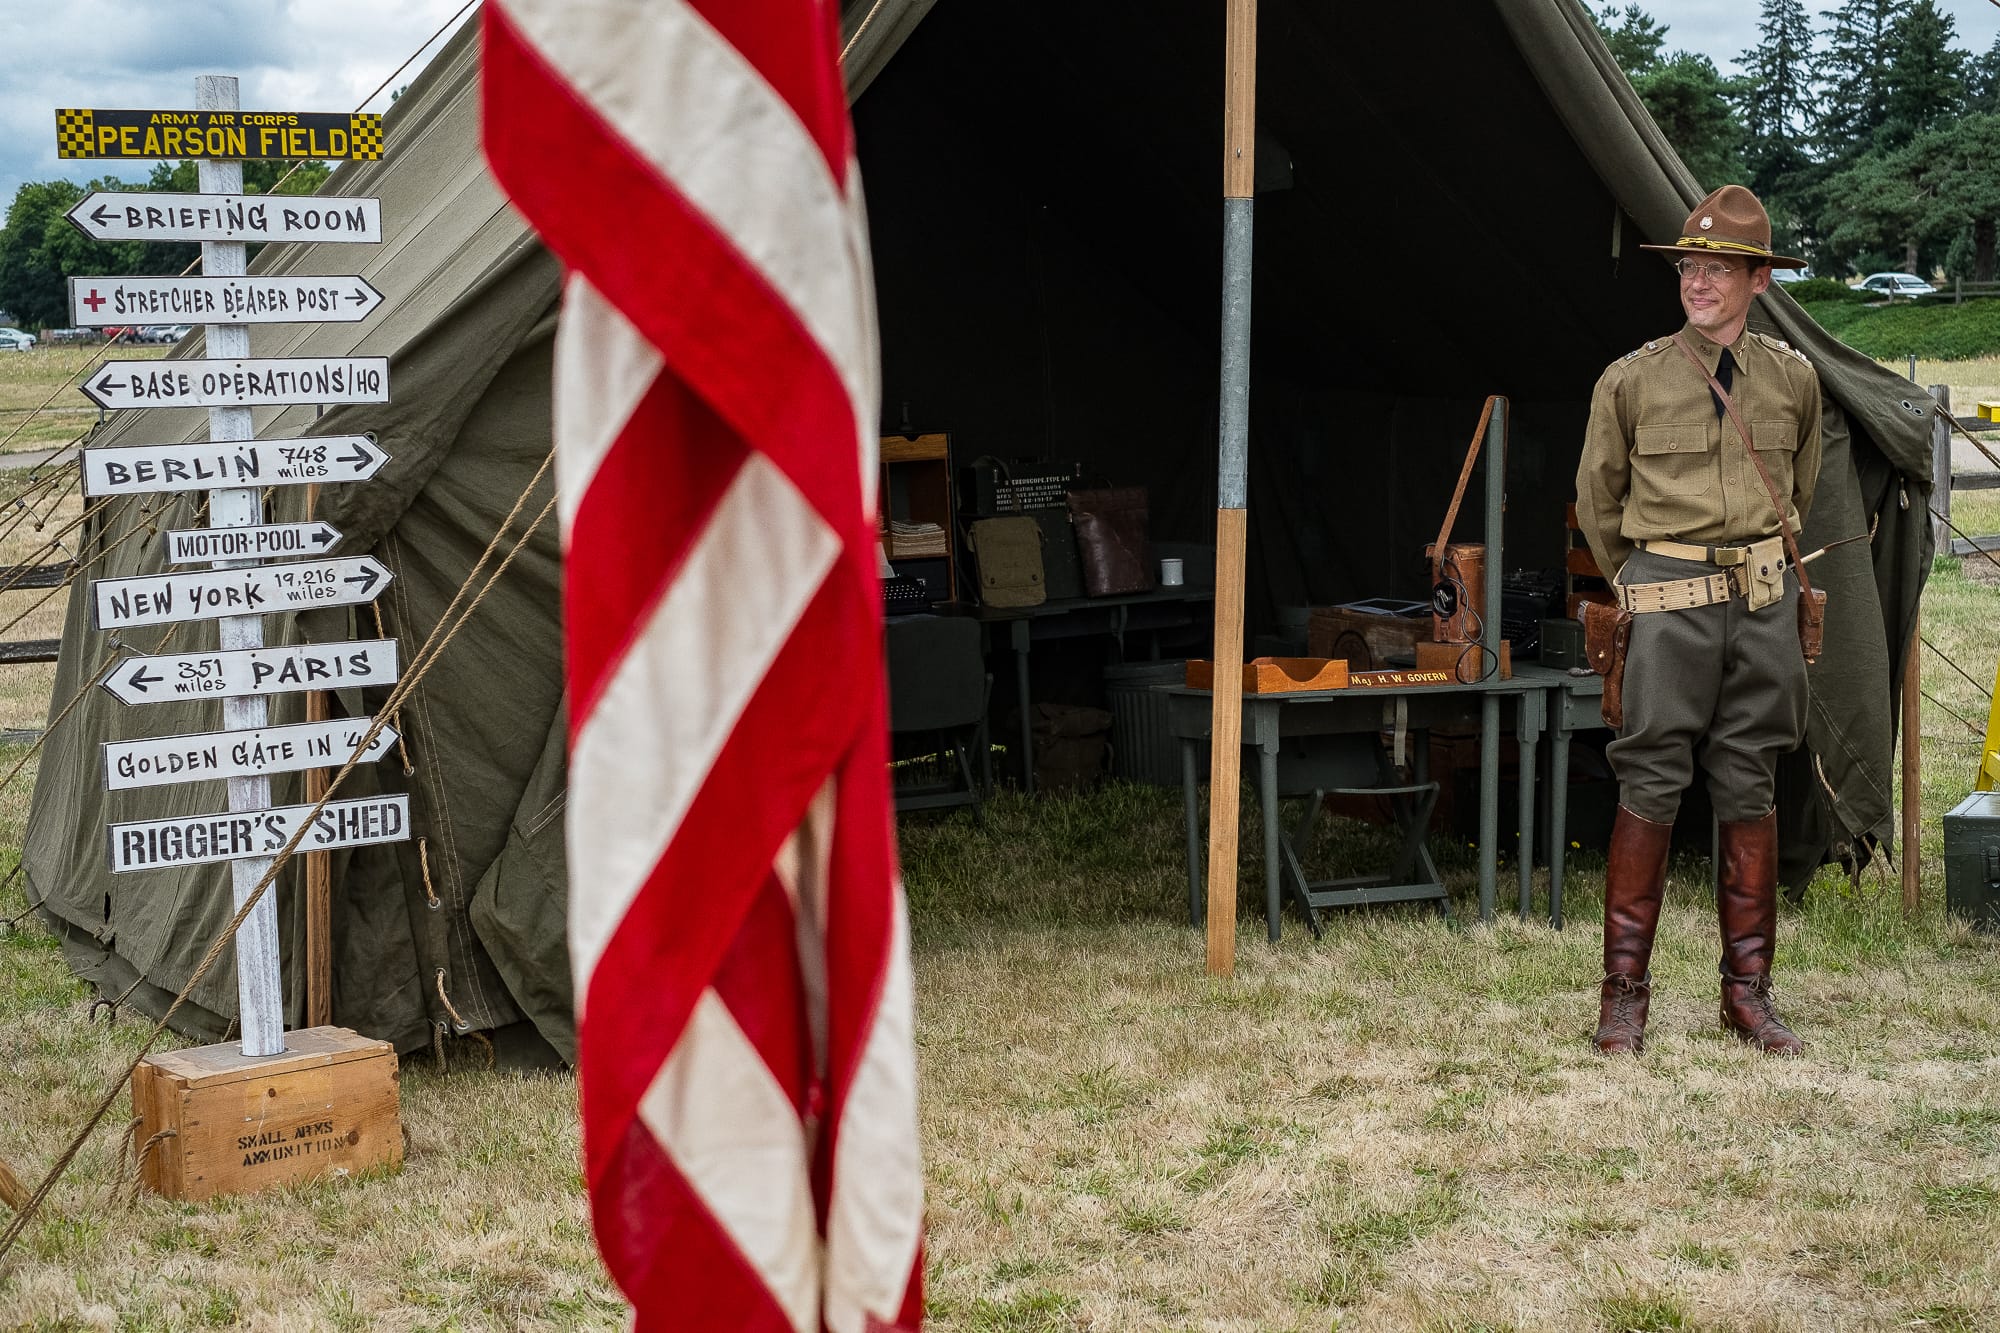 Christopher Miller, military memorabilia  collector and member of Living History Group NorthWest, stands in front a tent at the WWII Encampment display at Fort Vancouver on Saturday.